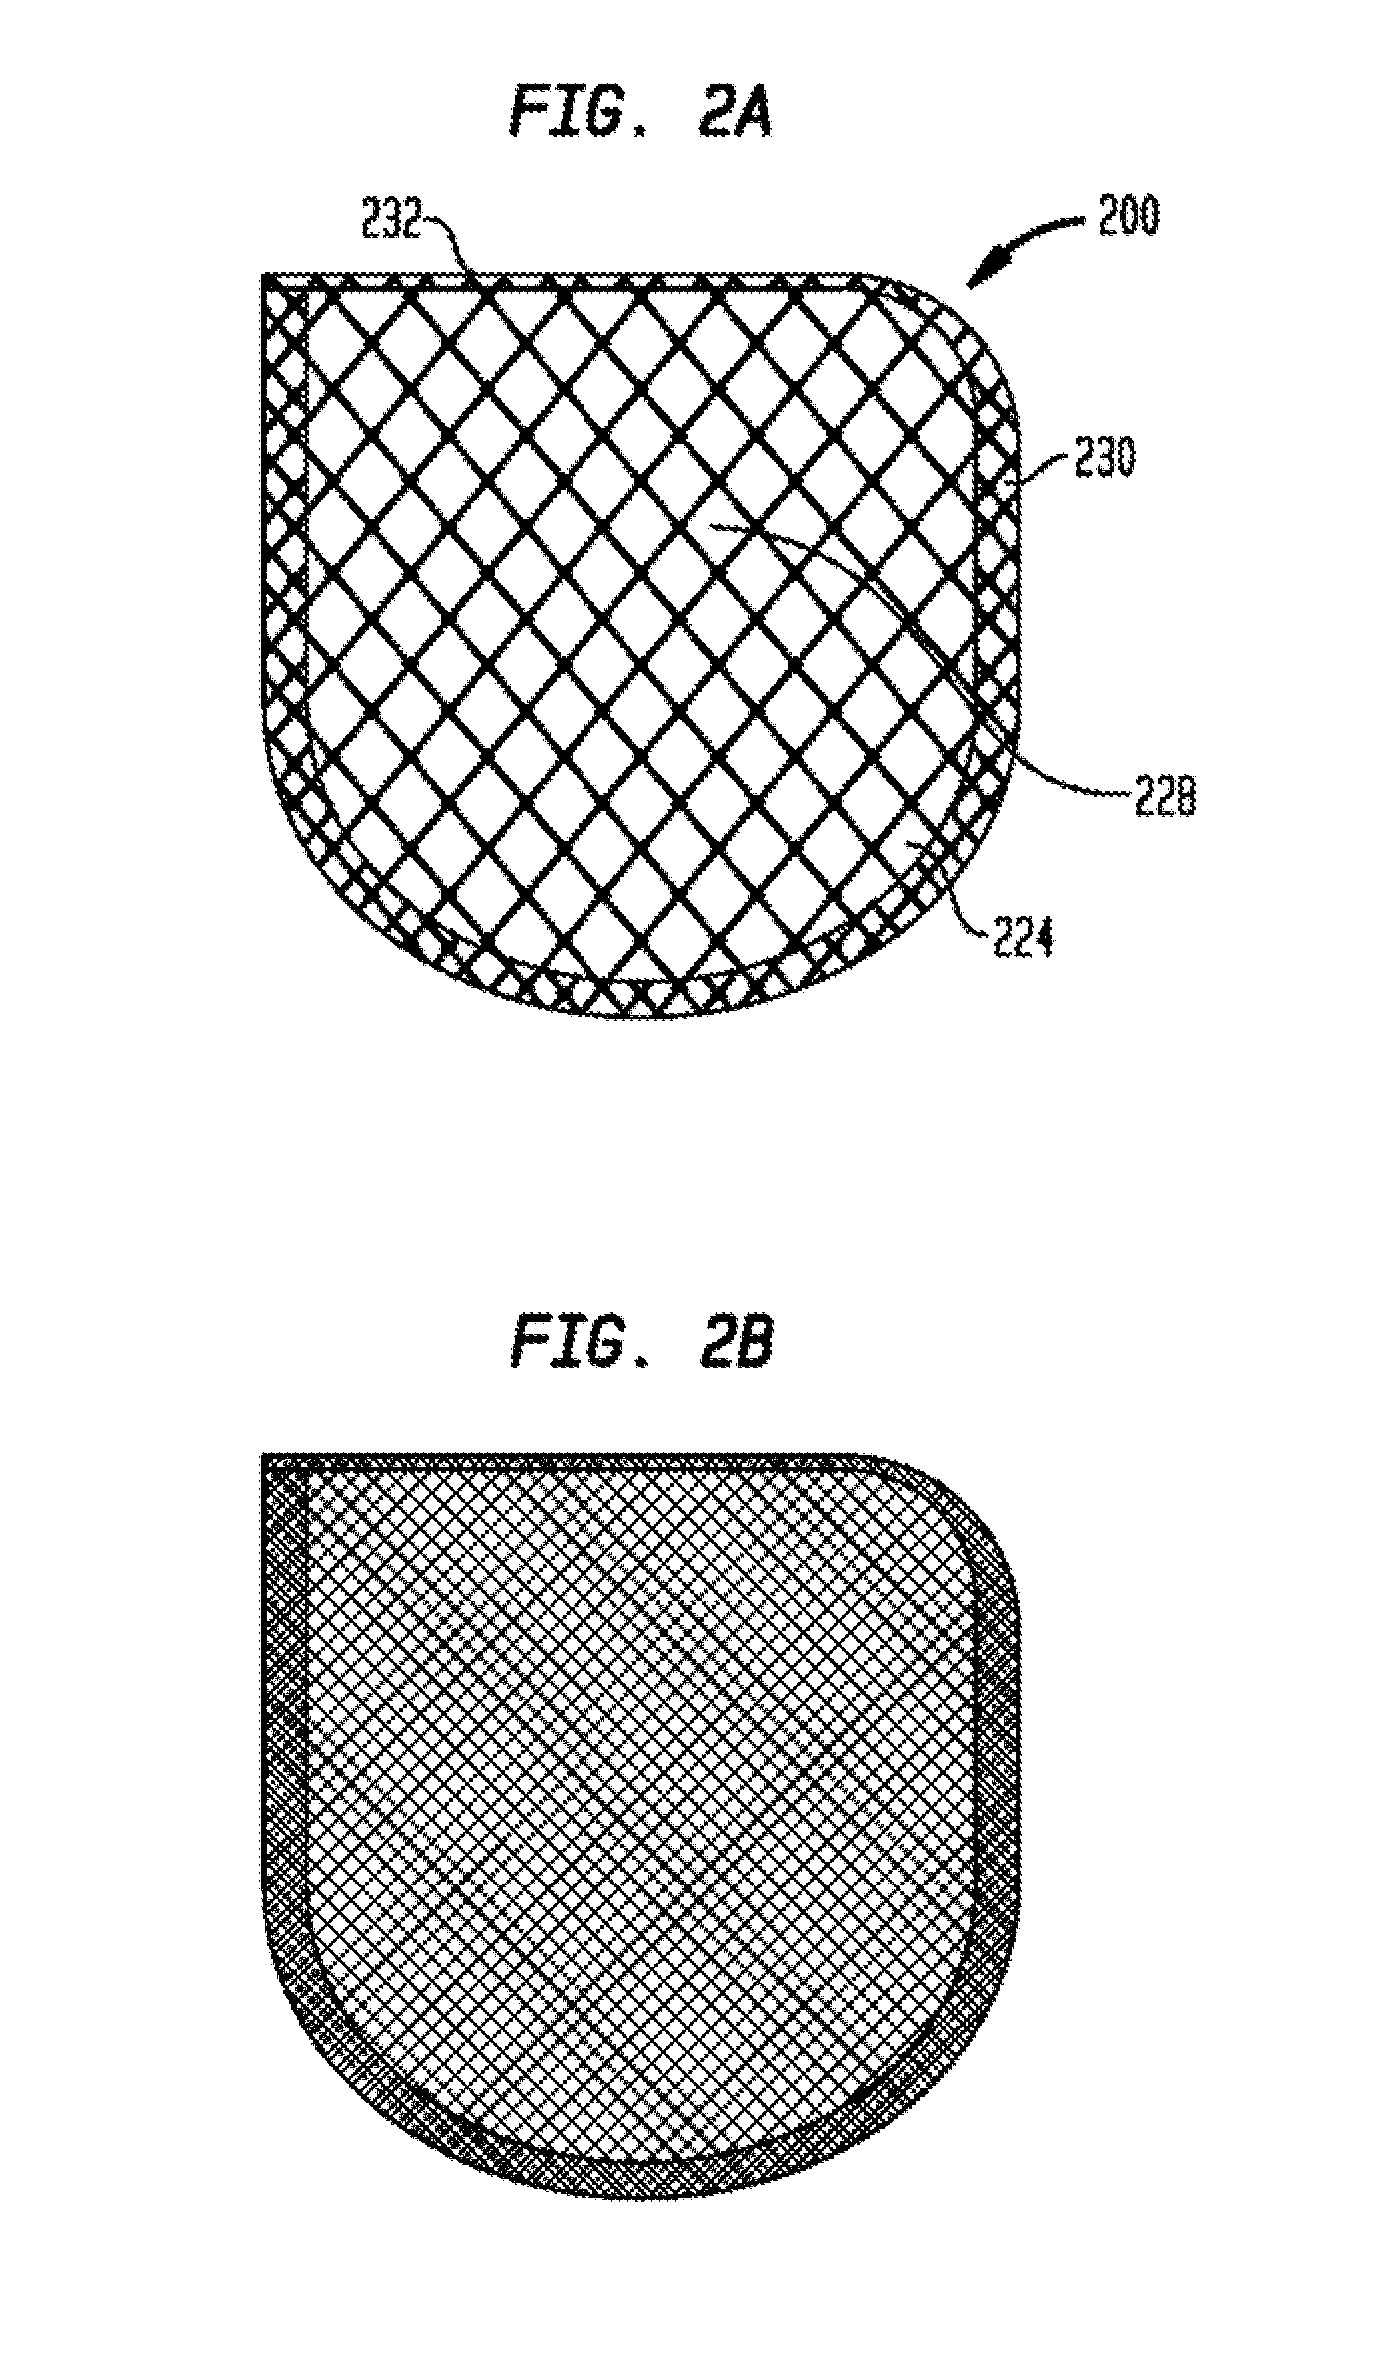 Anchorage devices comprising an active pharmaceutical ingredient